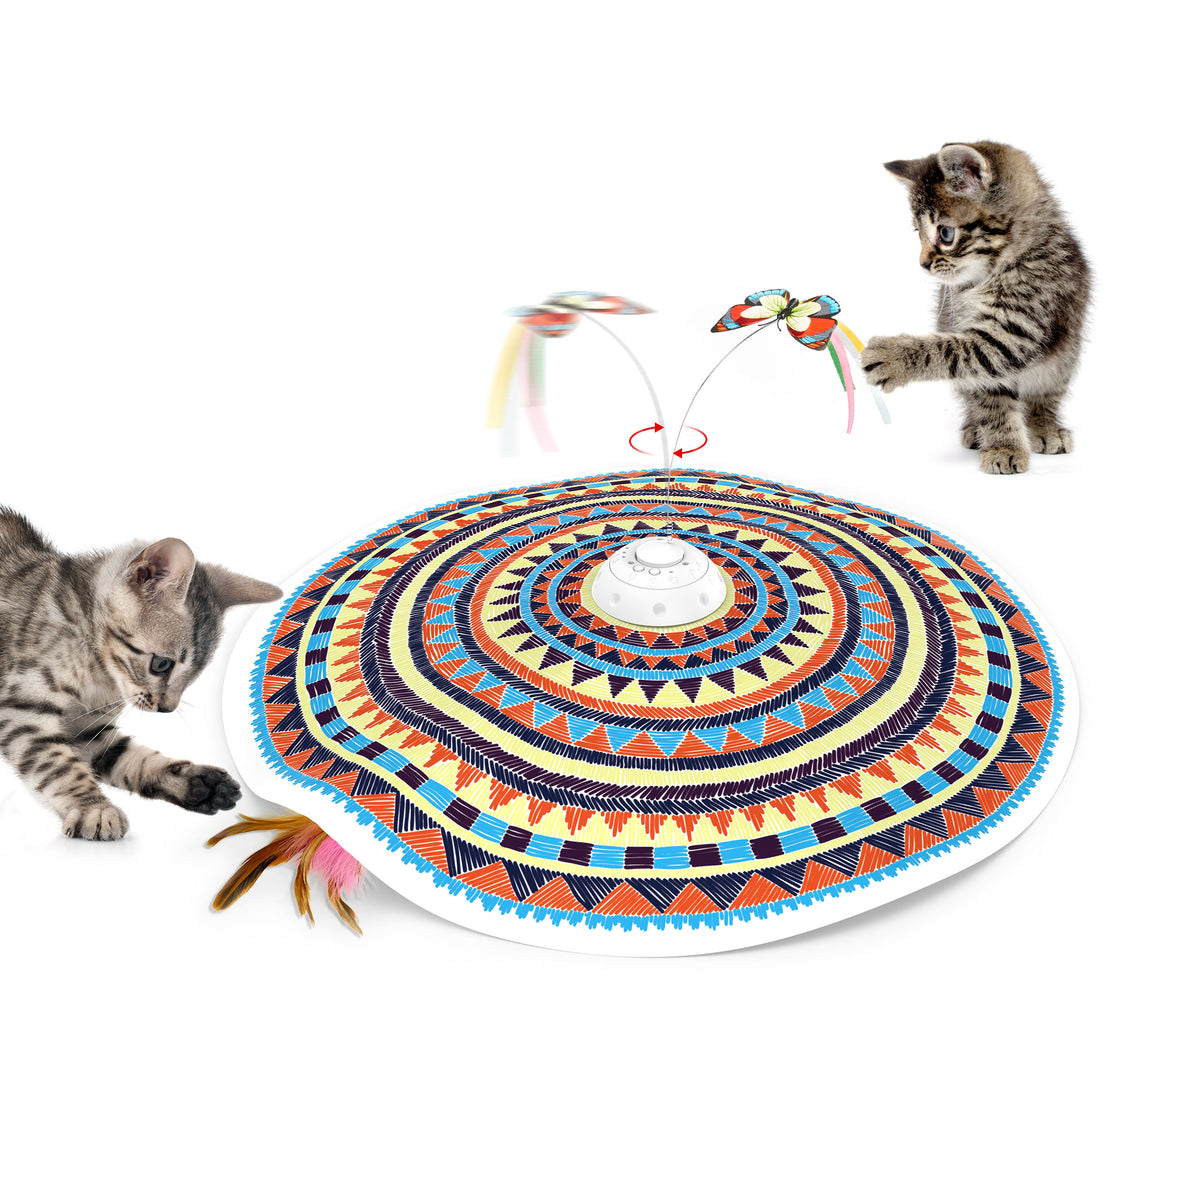 Whimsical Gardens: Interactive Cat Toys Among Flower Pots缩略图